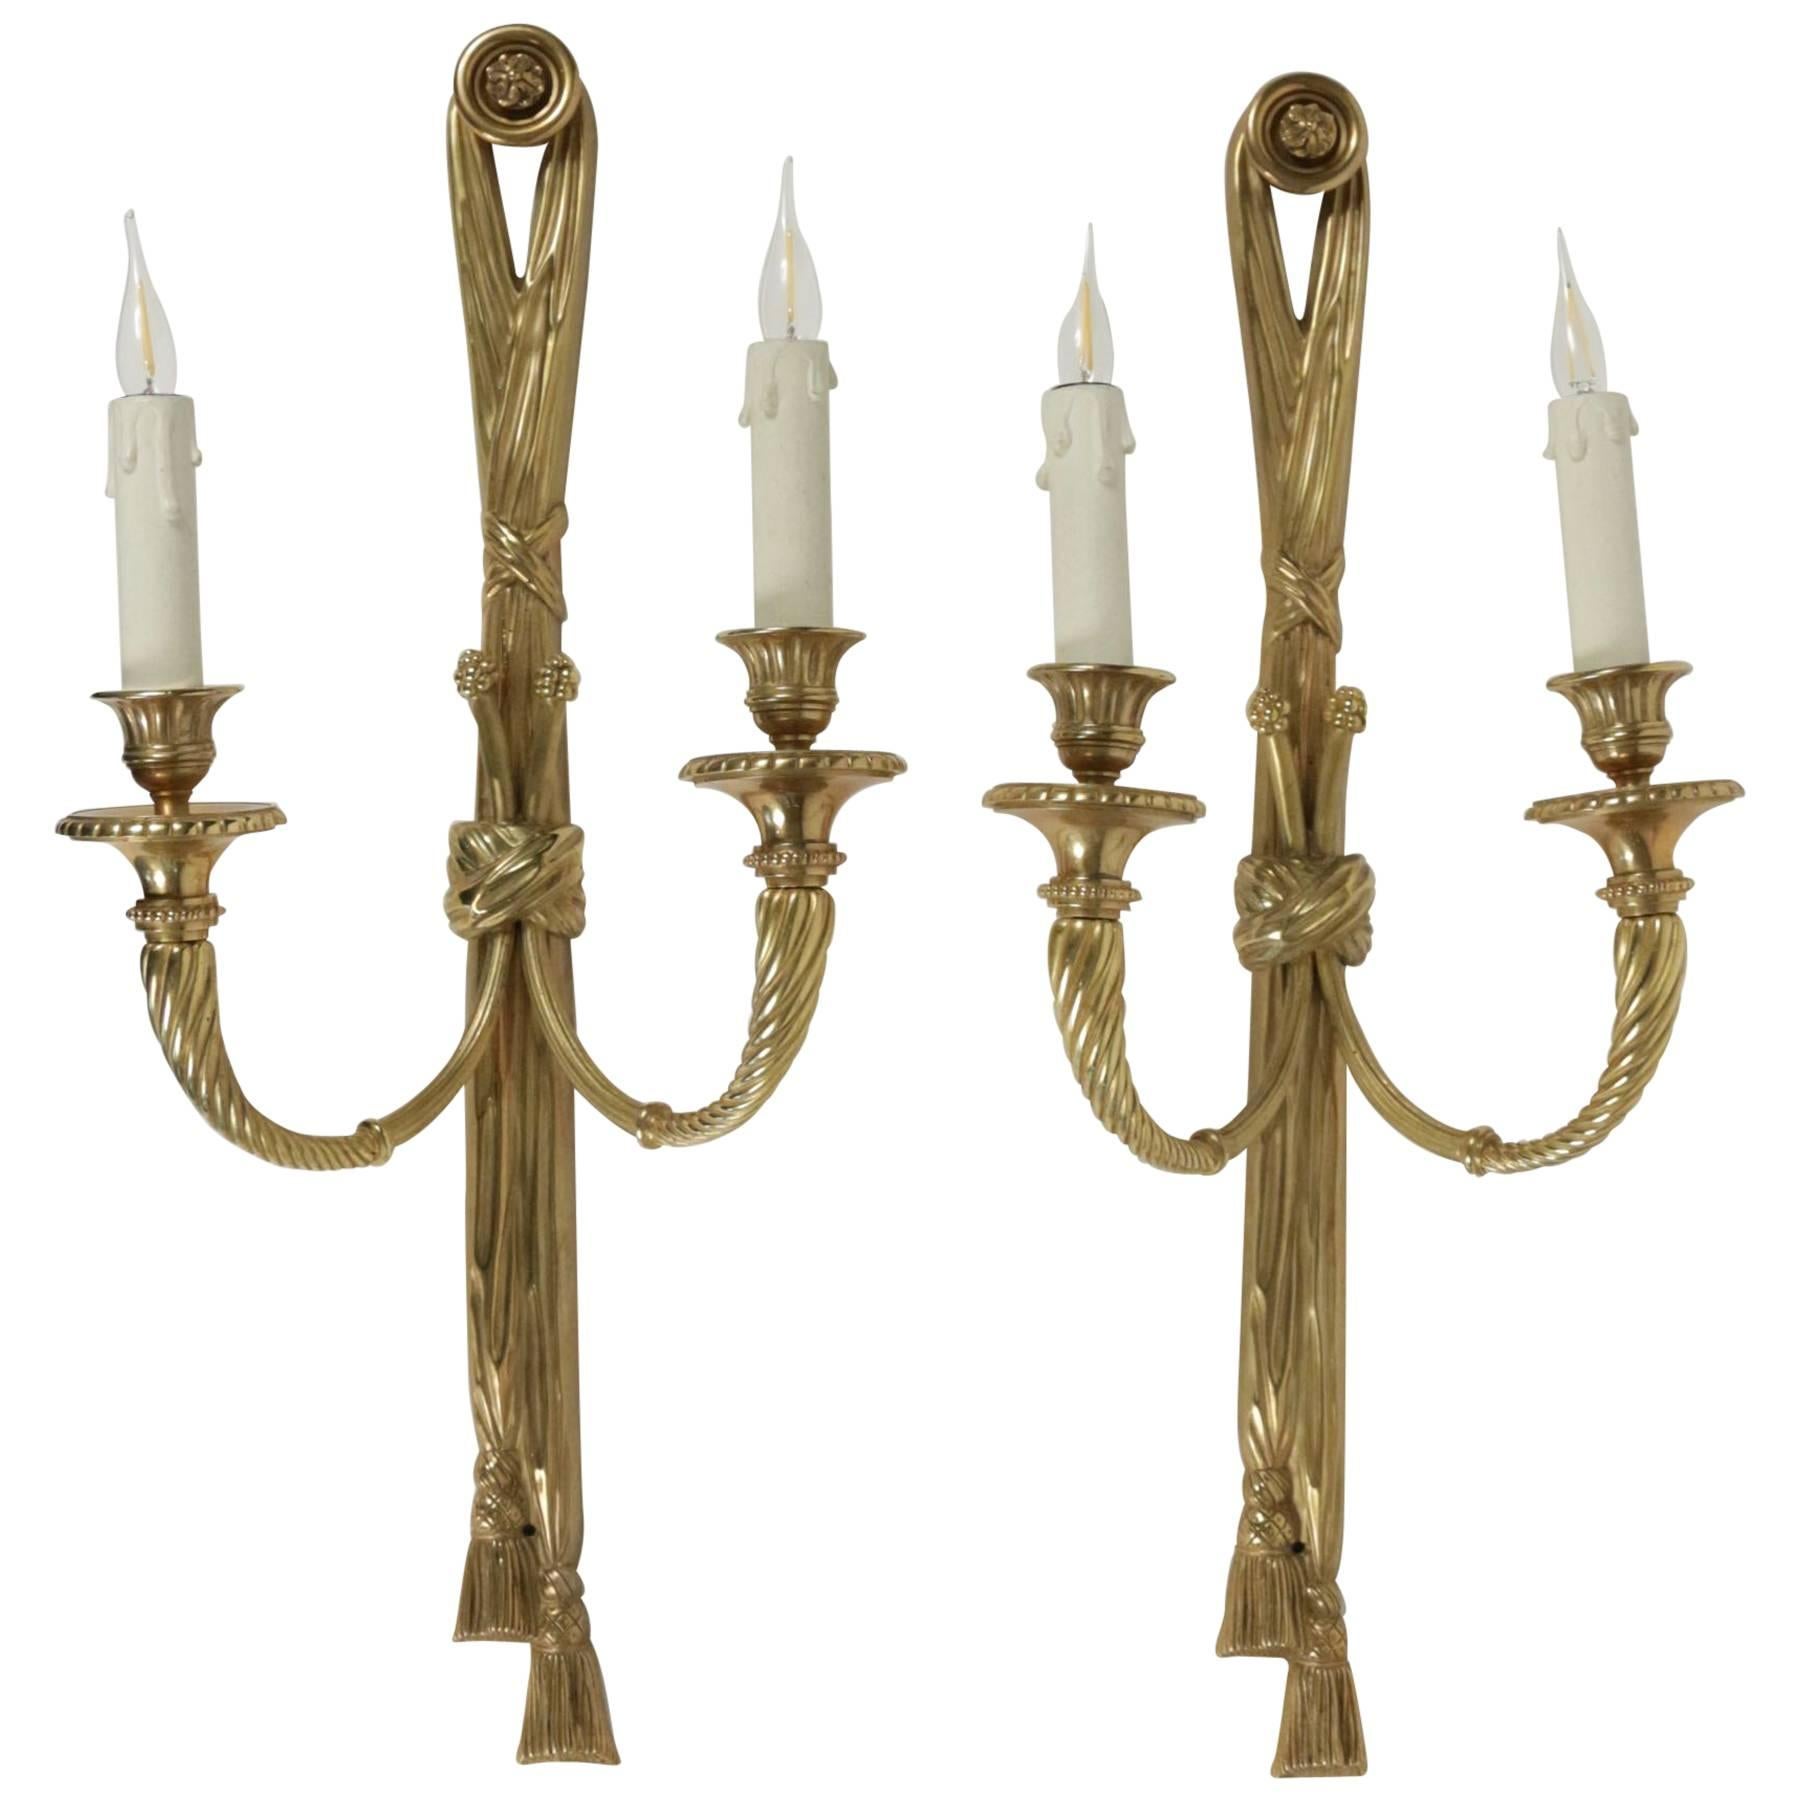 Important Pair of Sconces in the Style of Louis XVI from the 19th Century